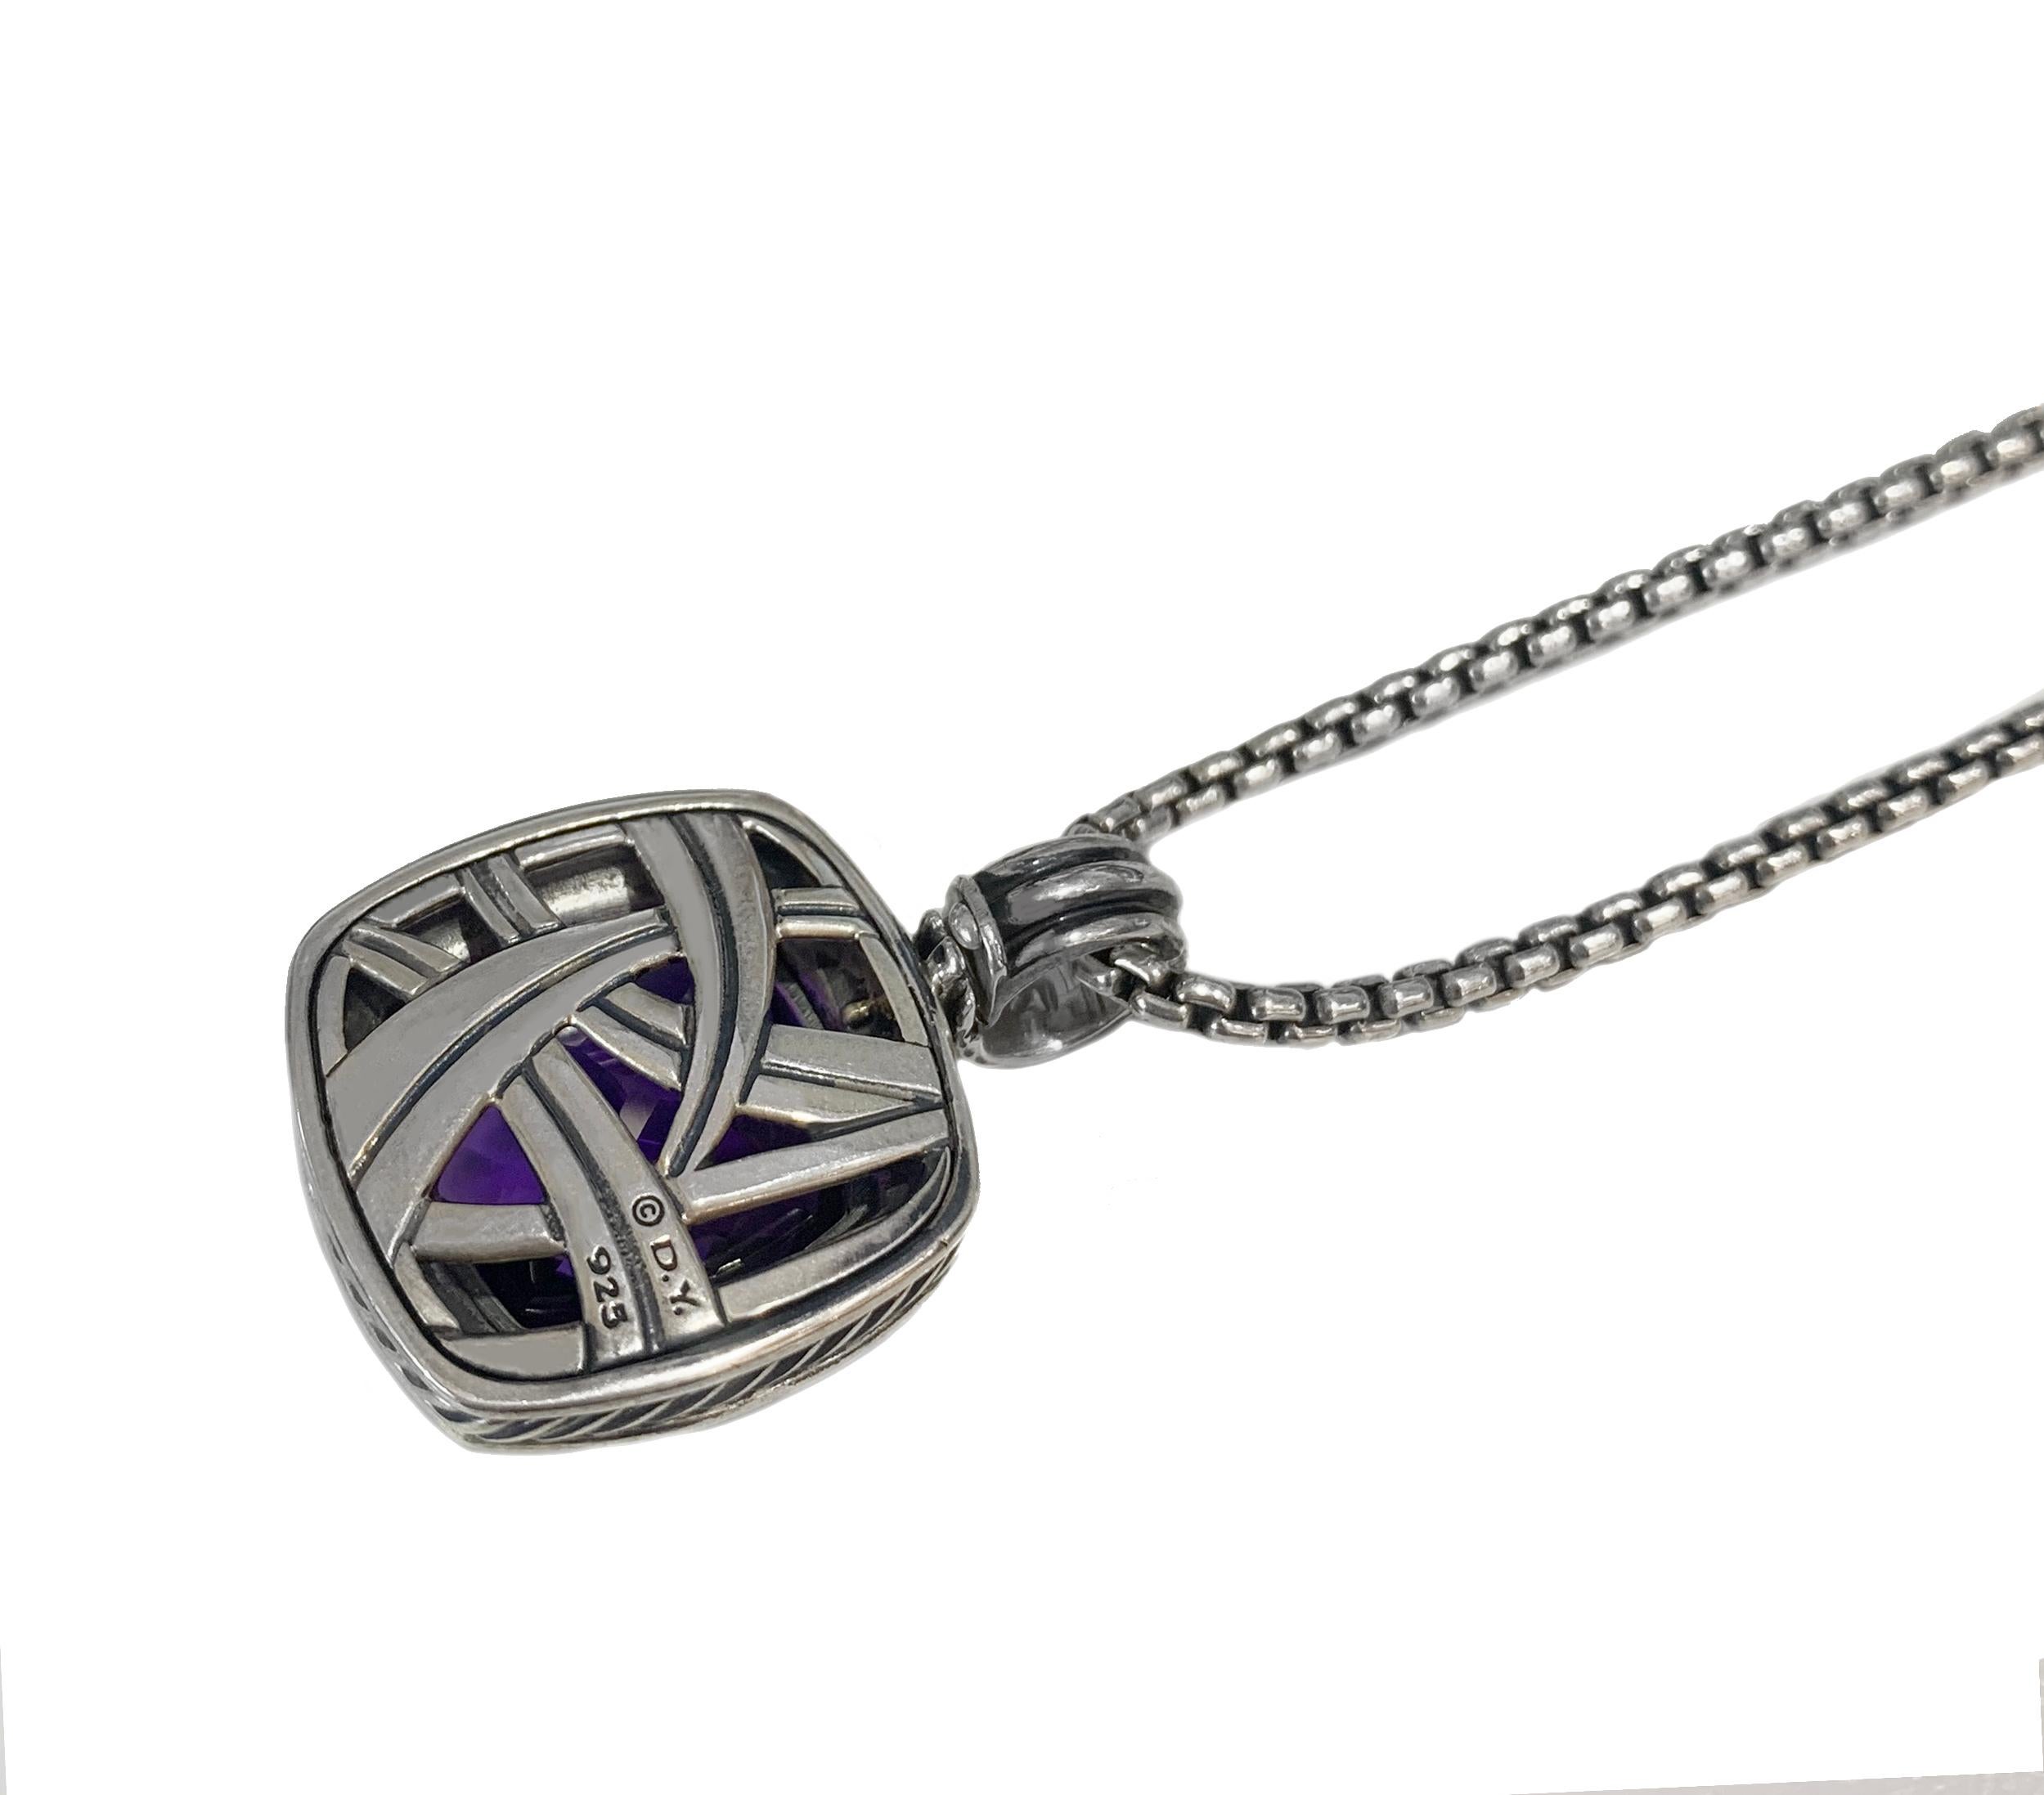 - Sterling silver
- Faceted amethyst, 17 x 17mm
- Pave diamonds, 0.41 total carat weight
- Pendant, 23 x 23mm
- Chain length 20